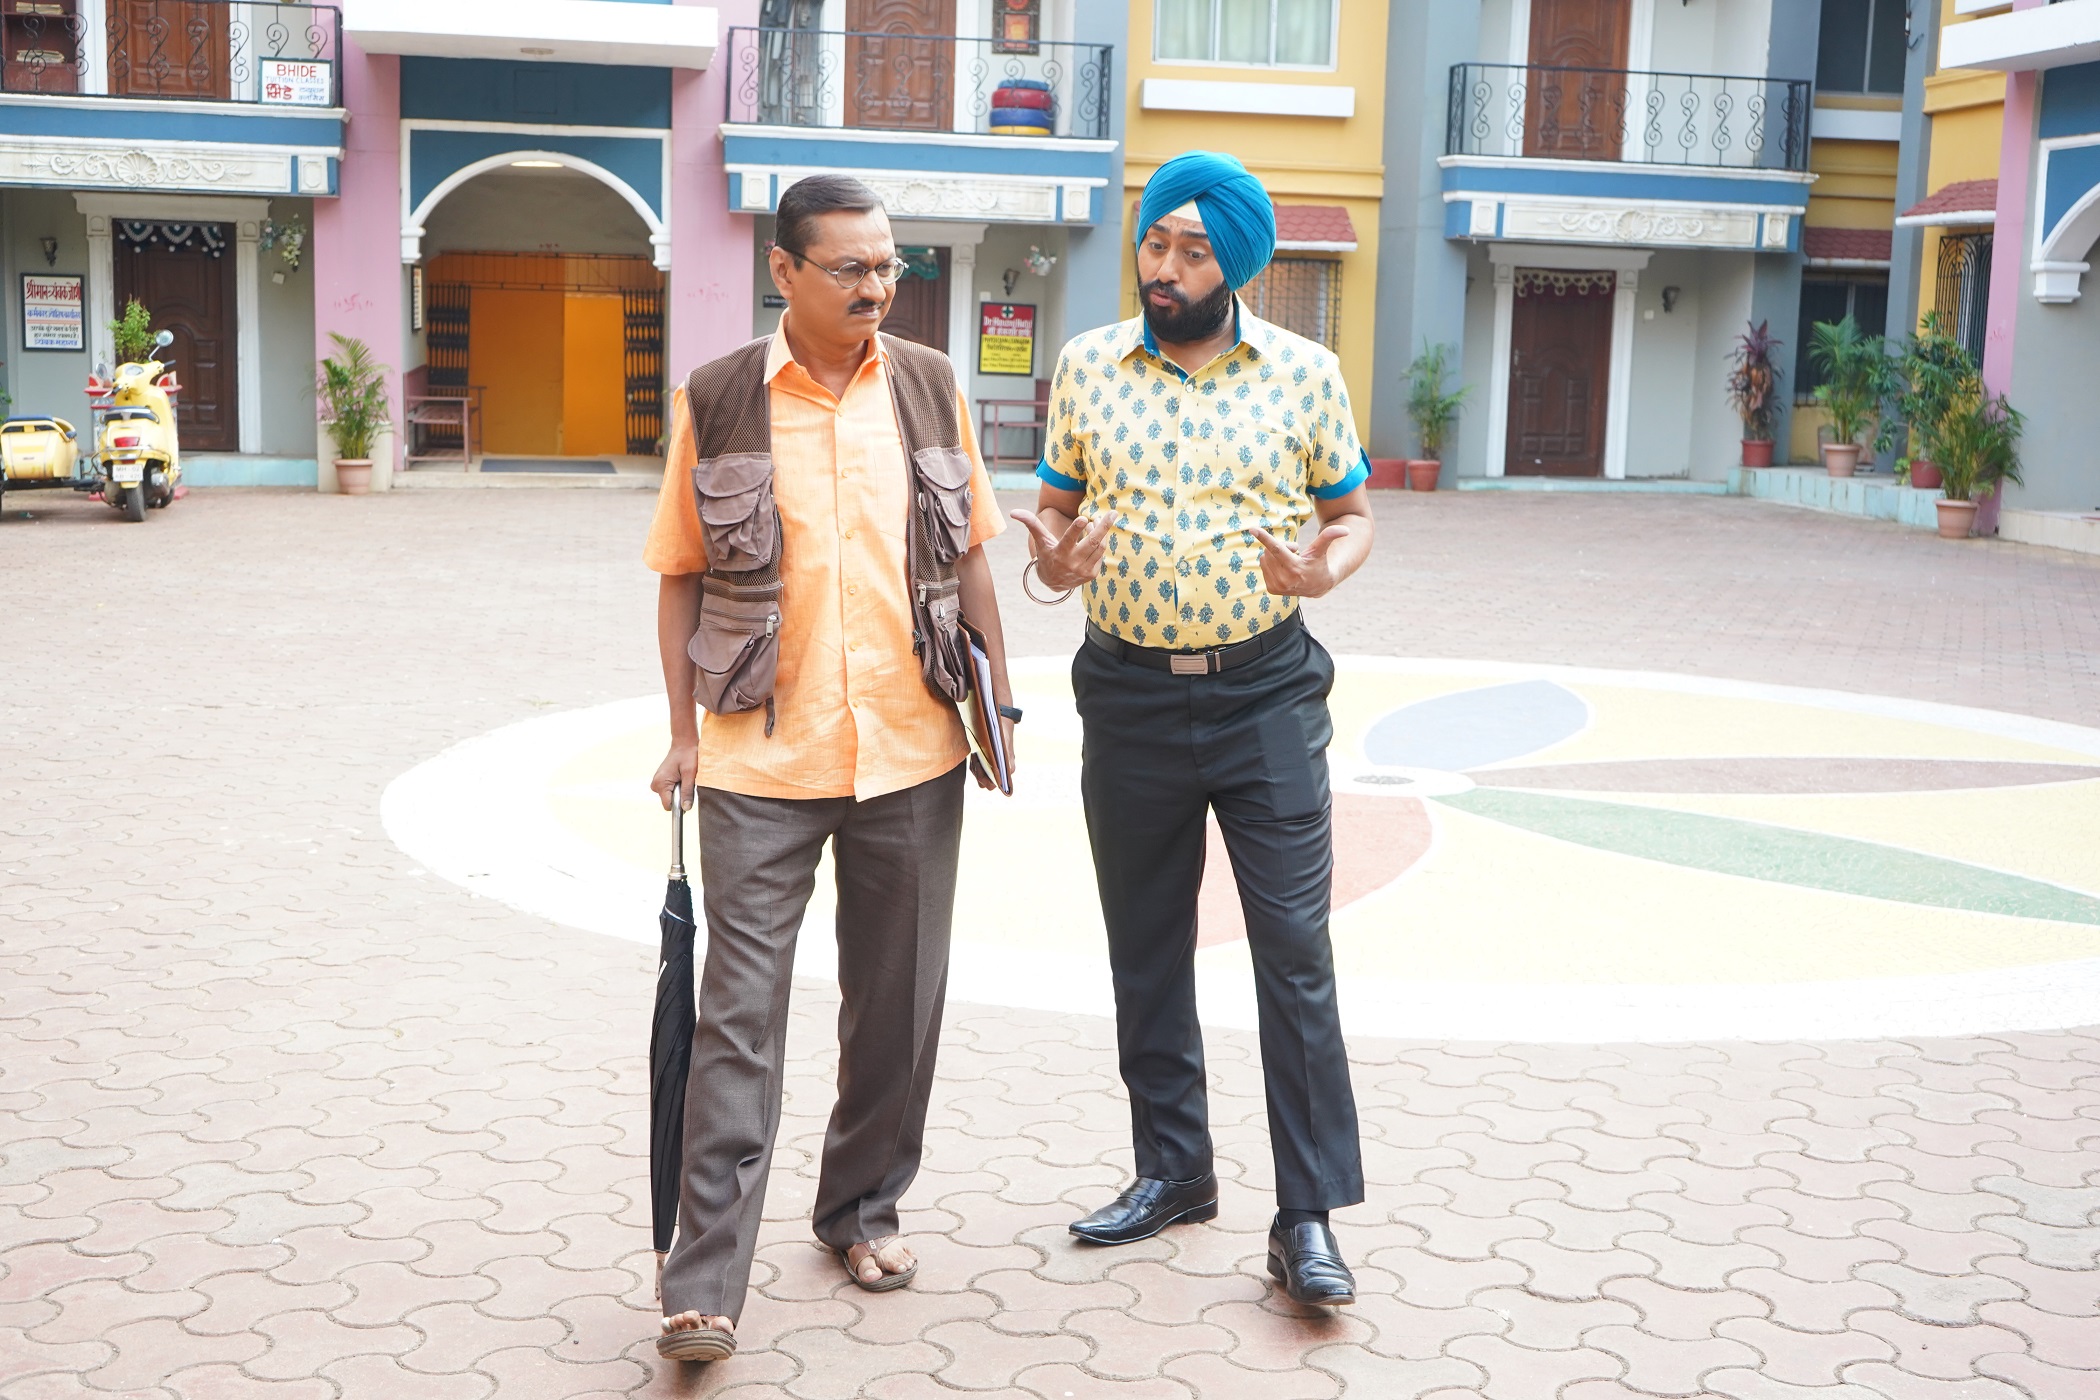 Taarak Mehta Ka Ooltah Chashmah: Popatlal Switches His Profession After Losing His Job As A Journalist 